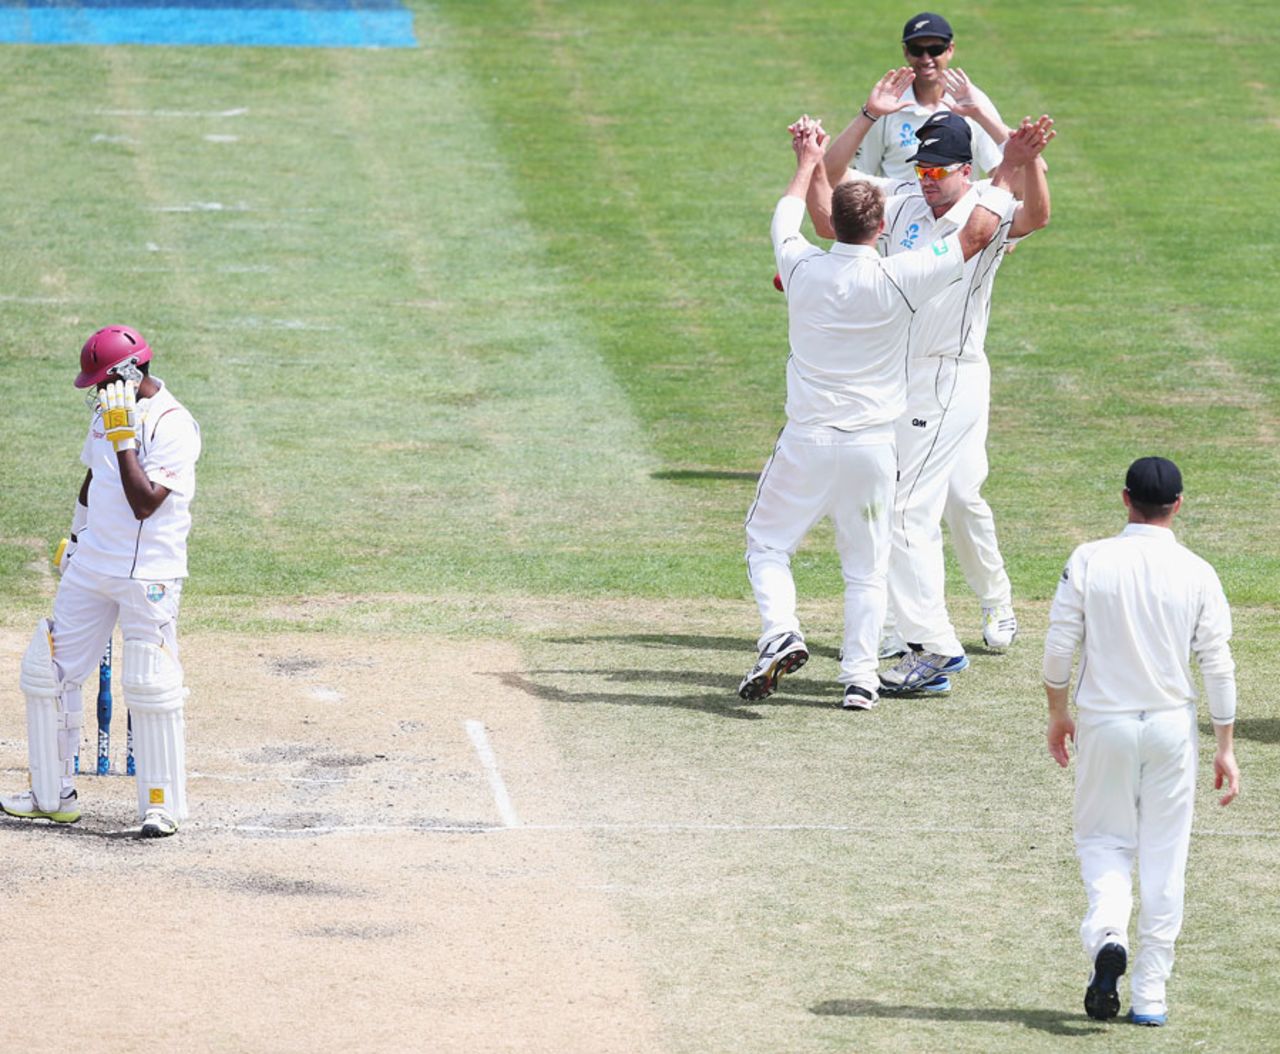 Corey Anderson celebrates after getting Narsingh Deonarine out for 52, New Zealand v West Indies, 1st Test, Dunedin, 4th day, December 6, 2013